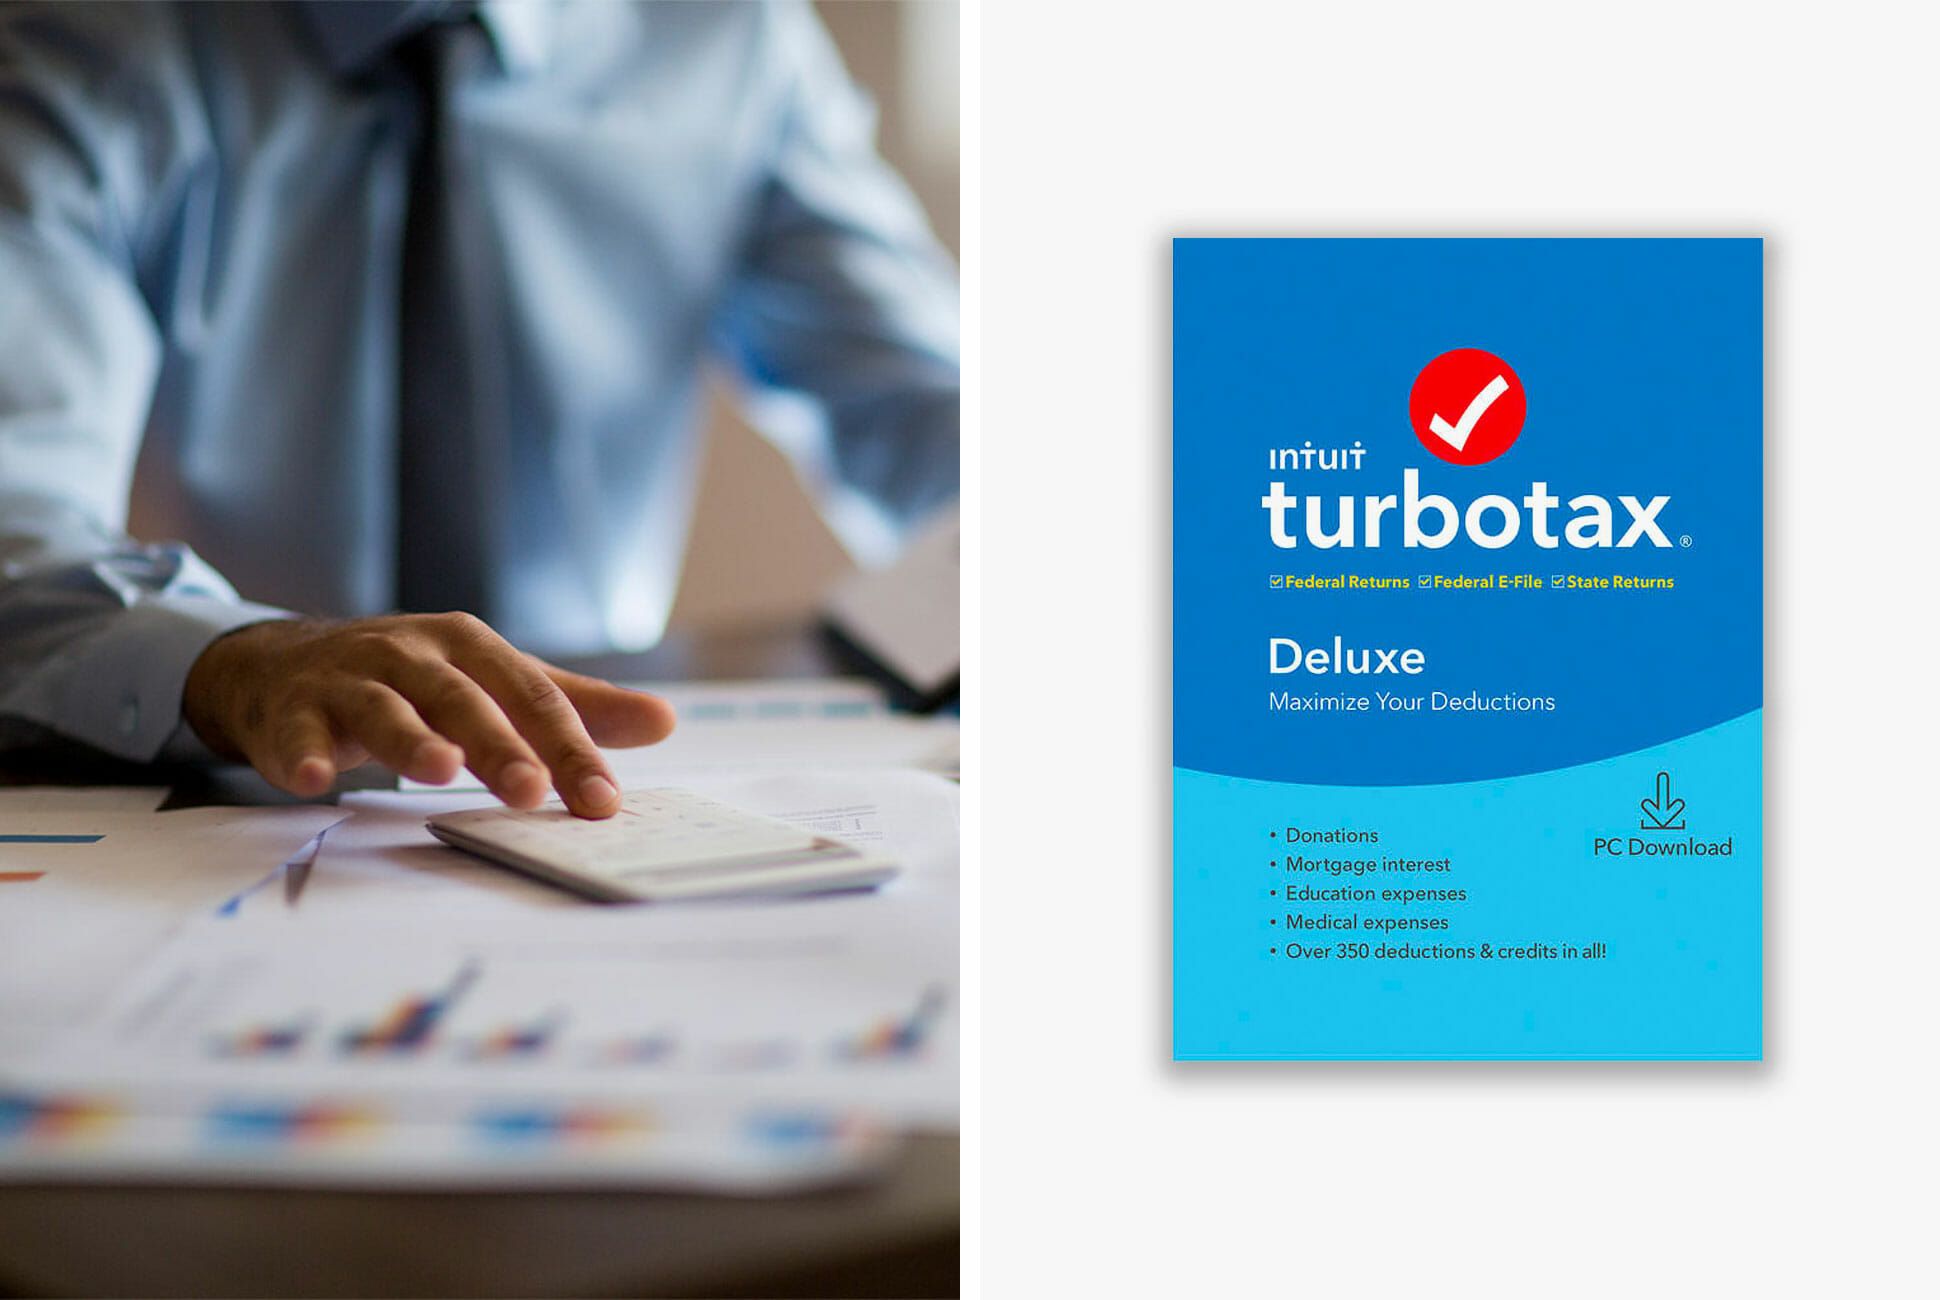 Turbotax 2017 home and business file 1099s plorart